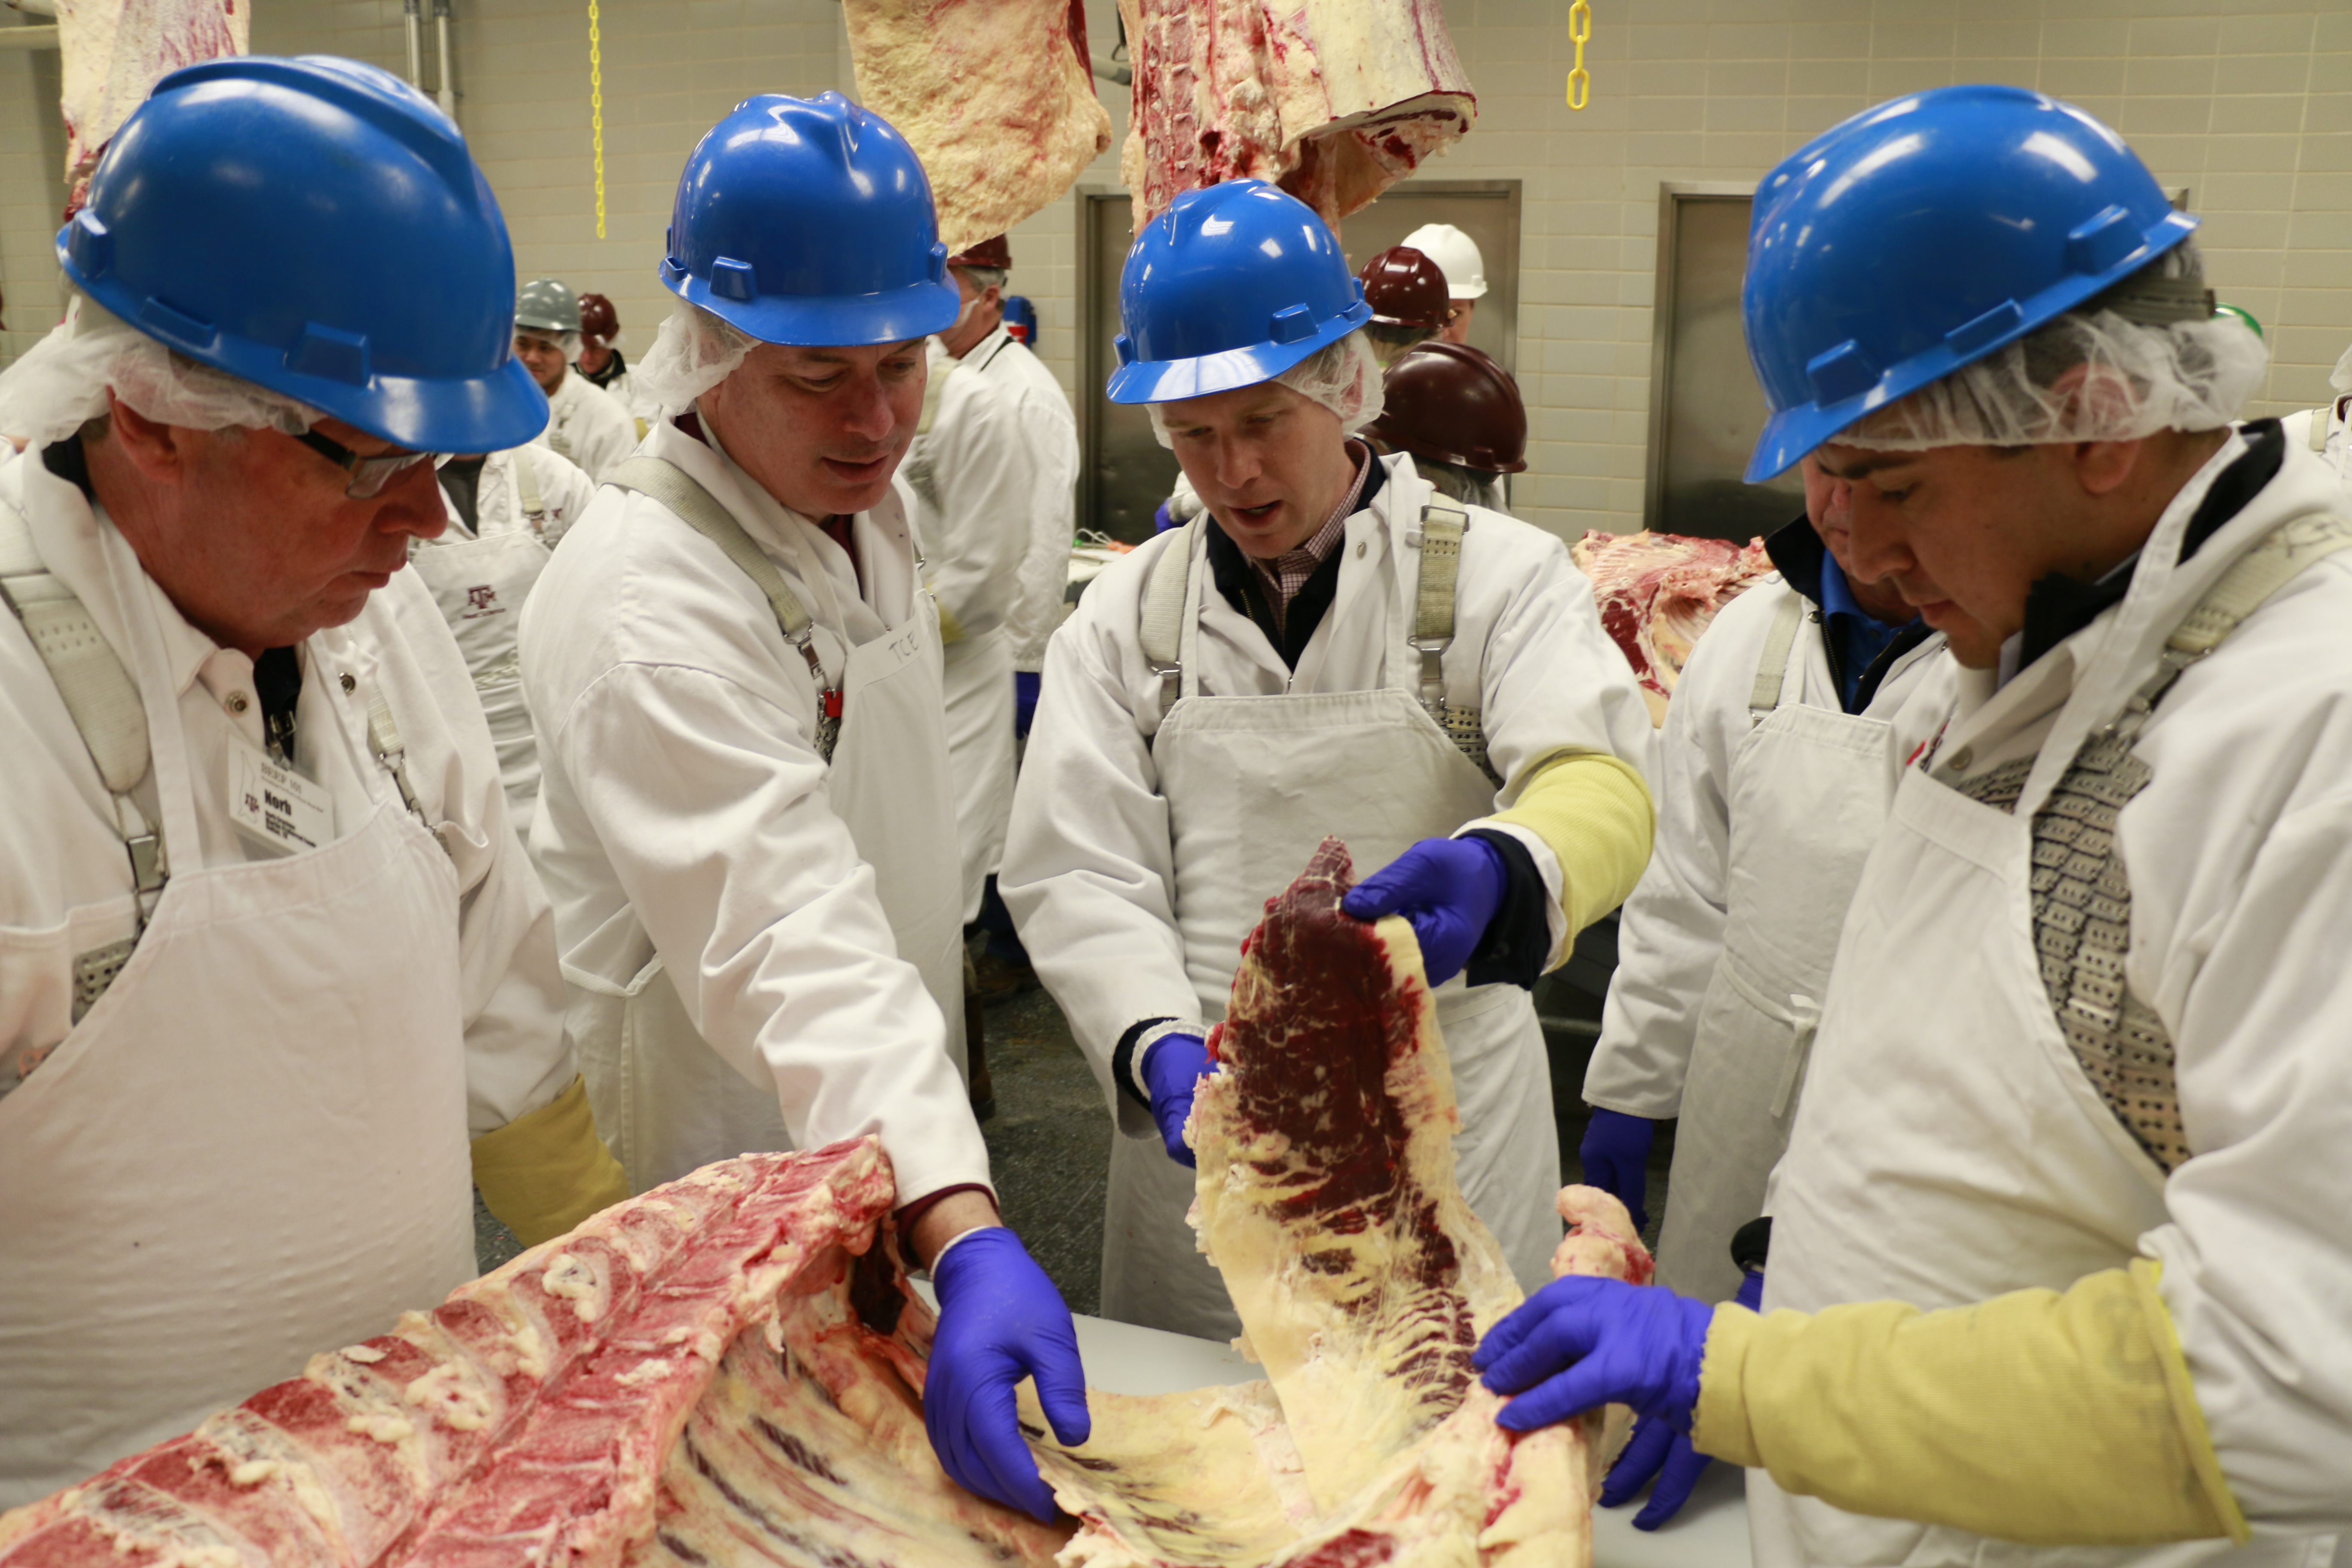 Participants discussing beef skirts